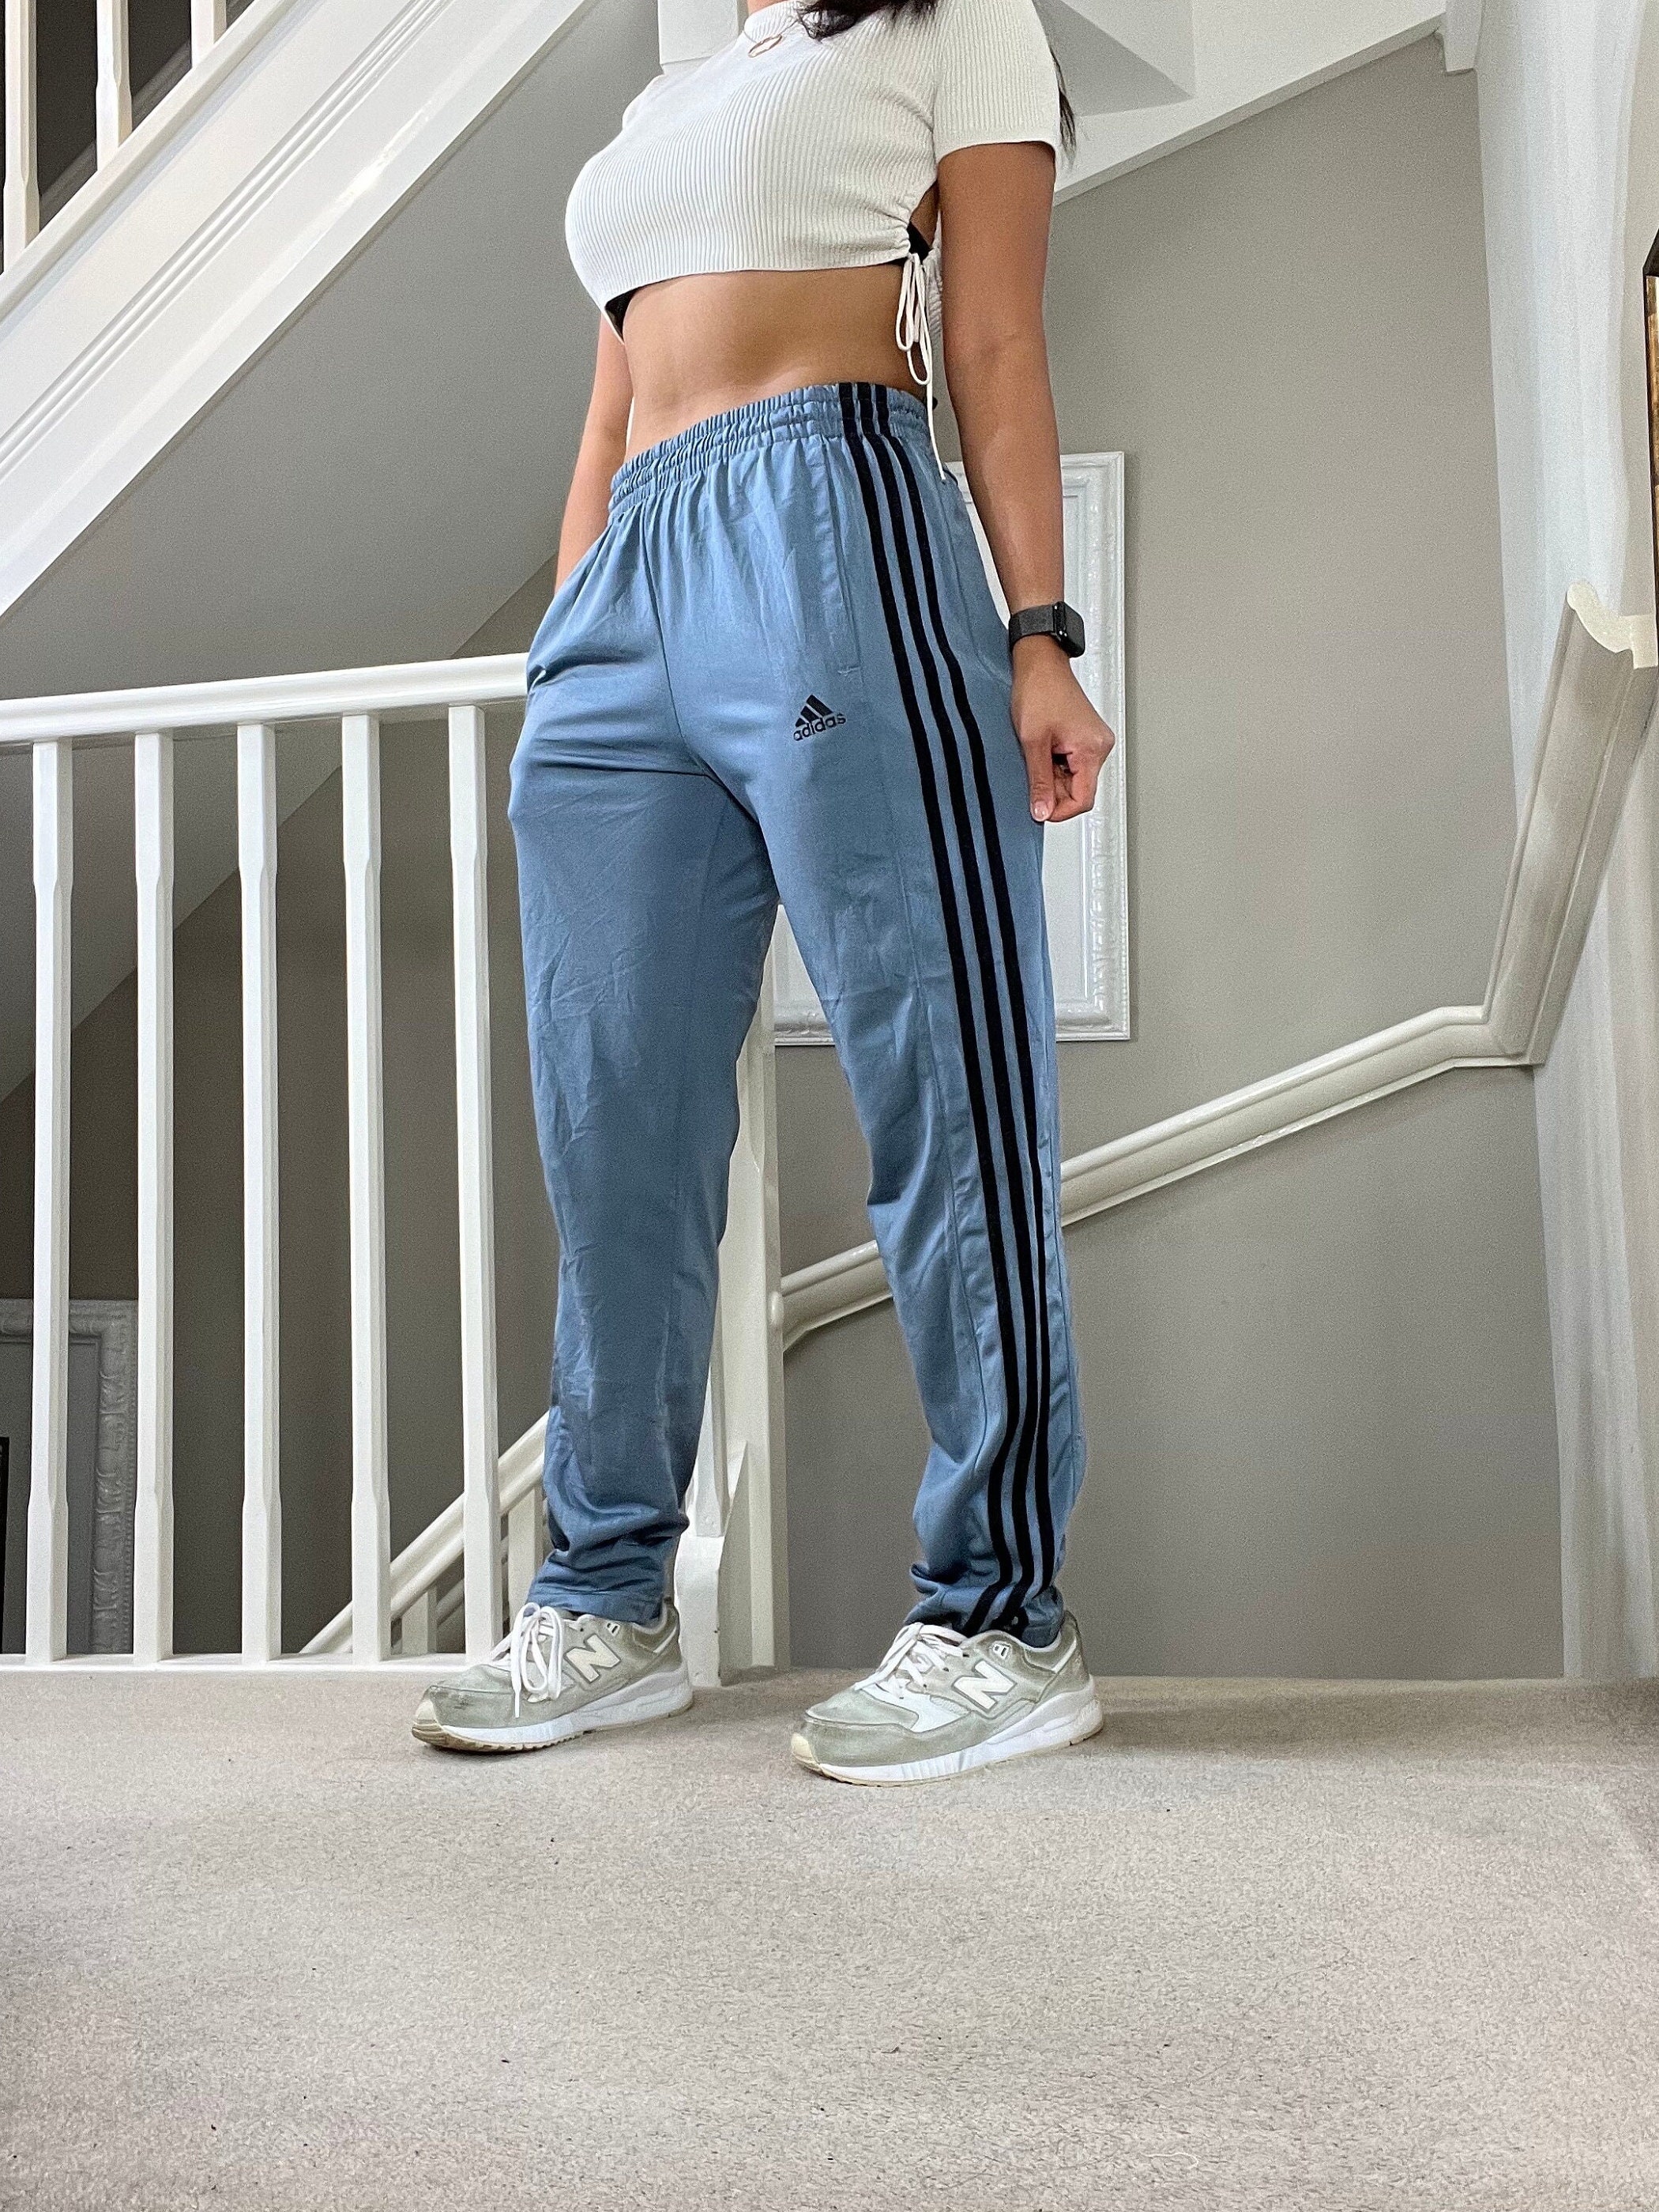 Vintage Adidas Loose Fit Track Trousers Size M Unisex in Blue Colourway  With Black Stripes 